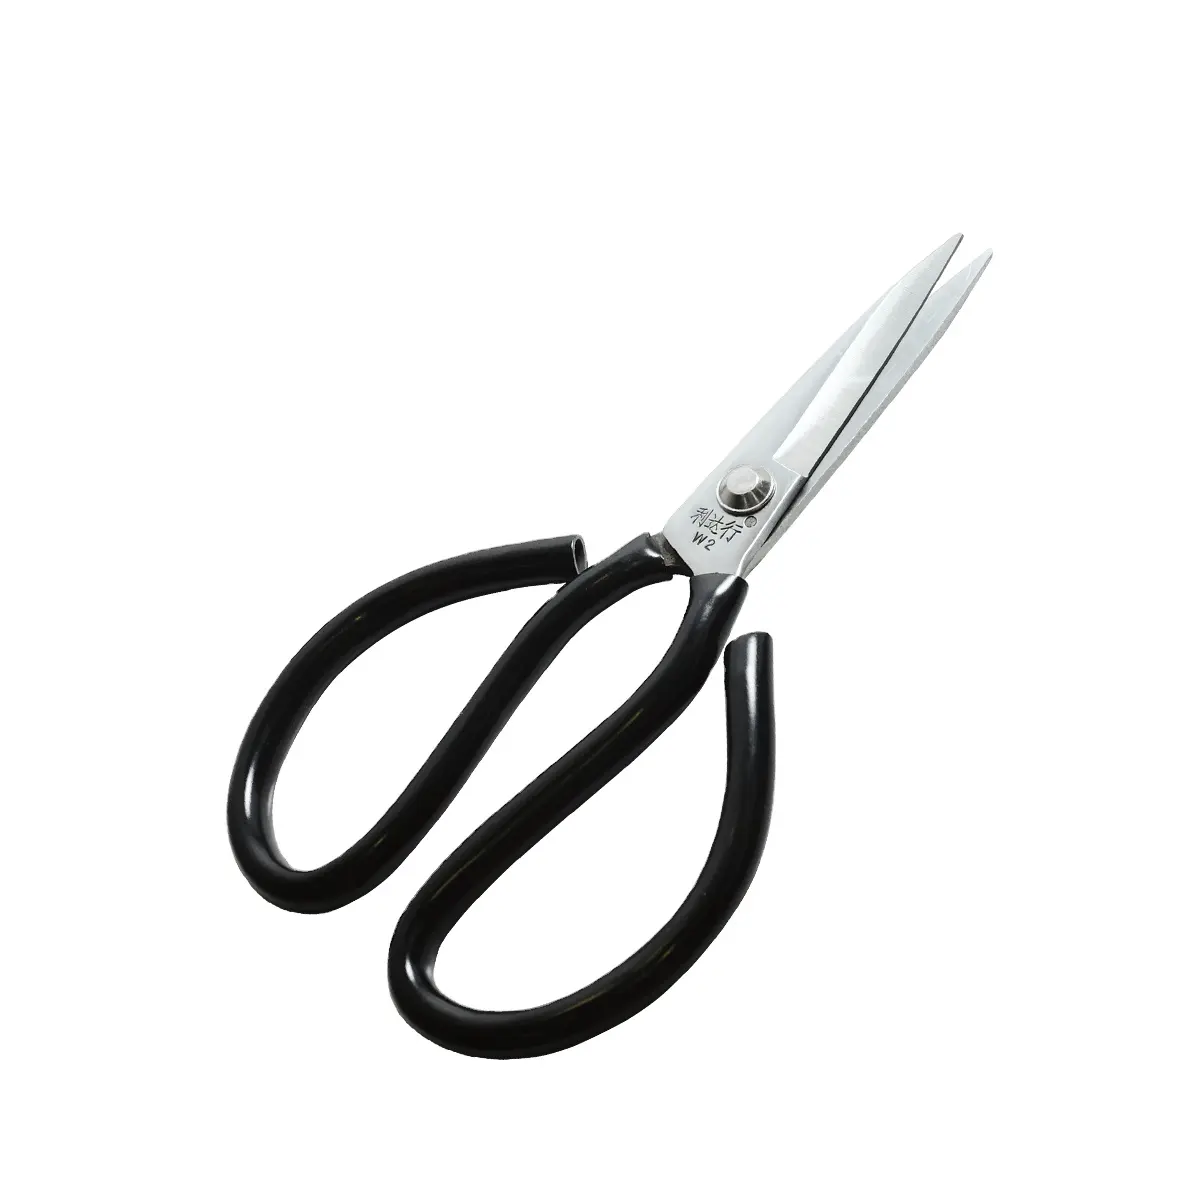 LDH-W1 Traditional scissors shoes tools leather cut